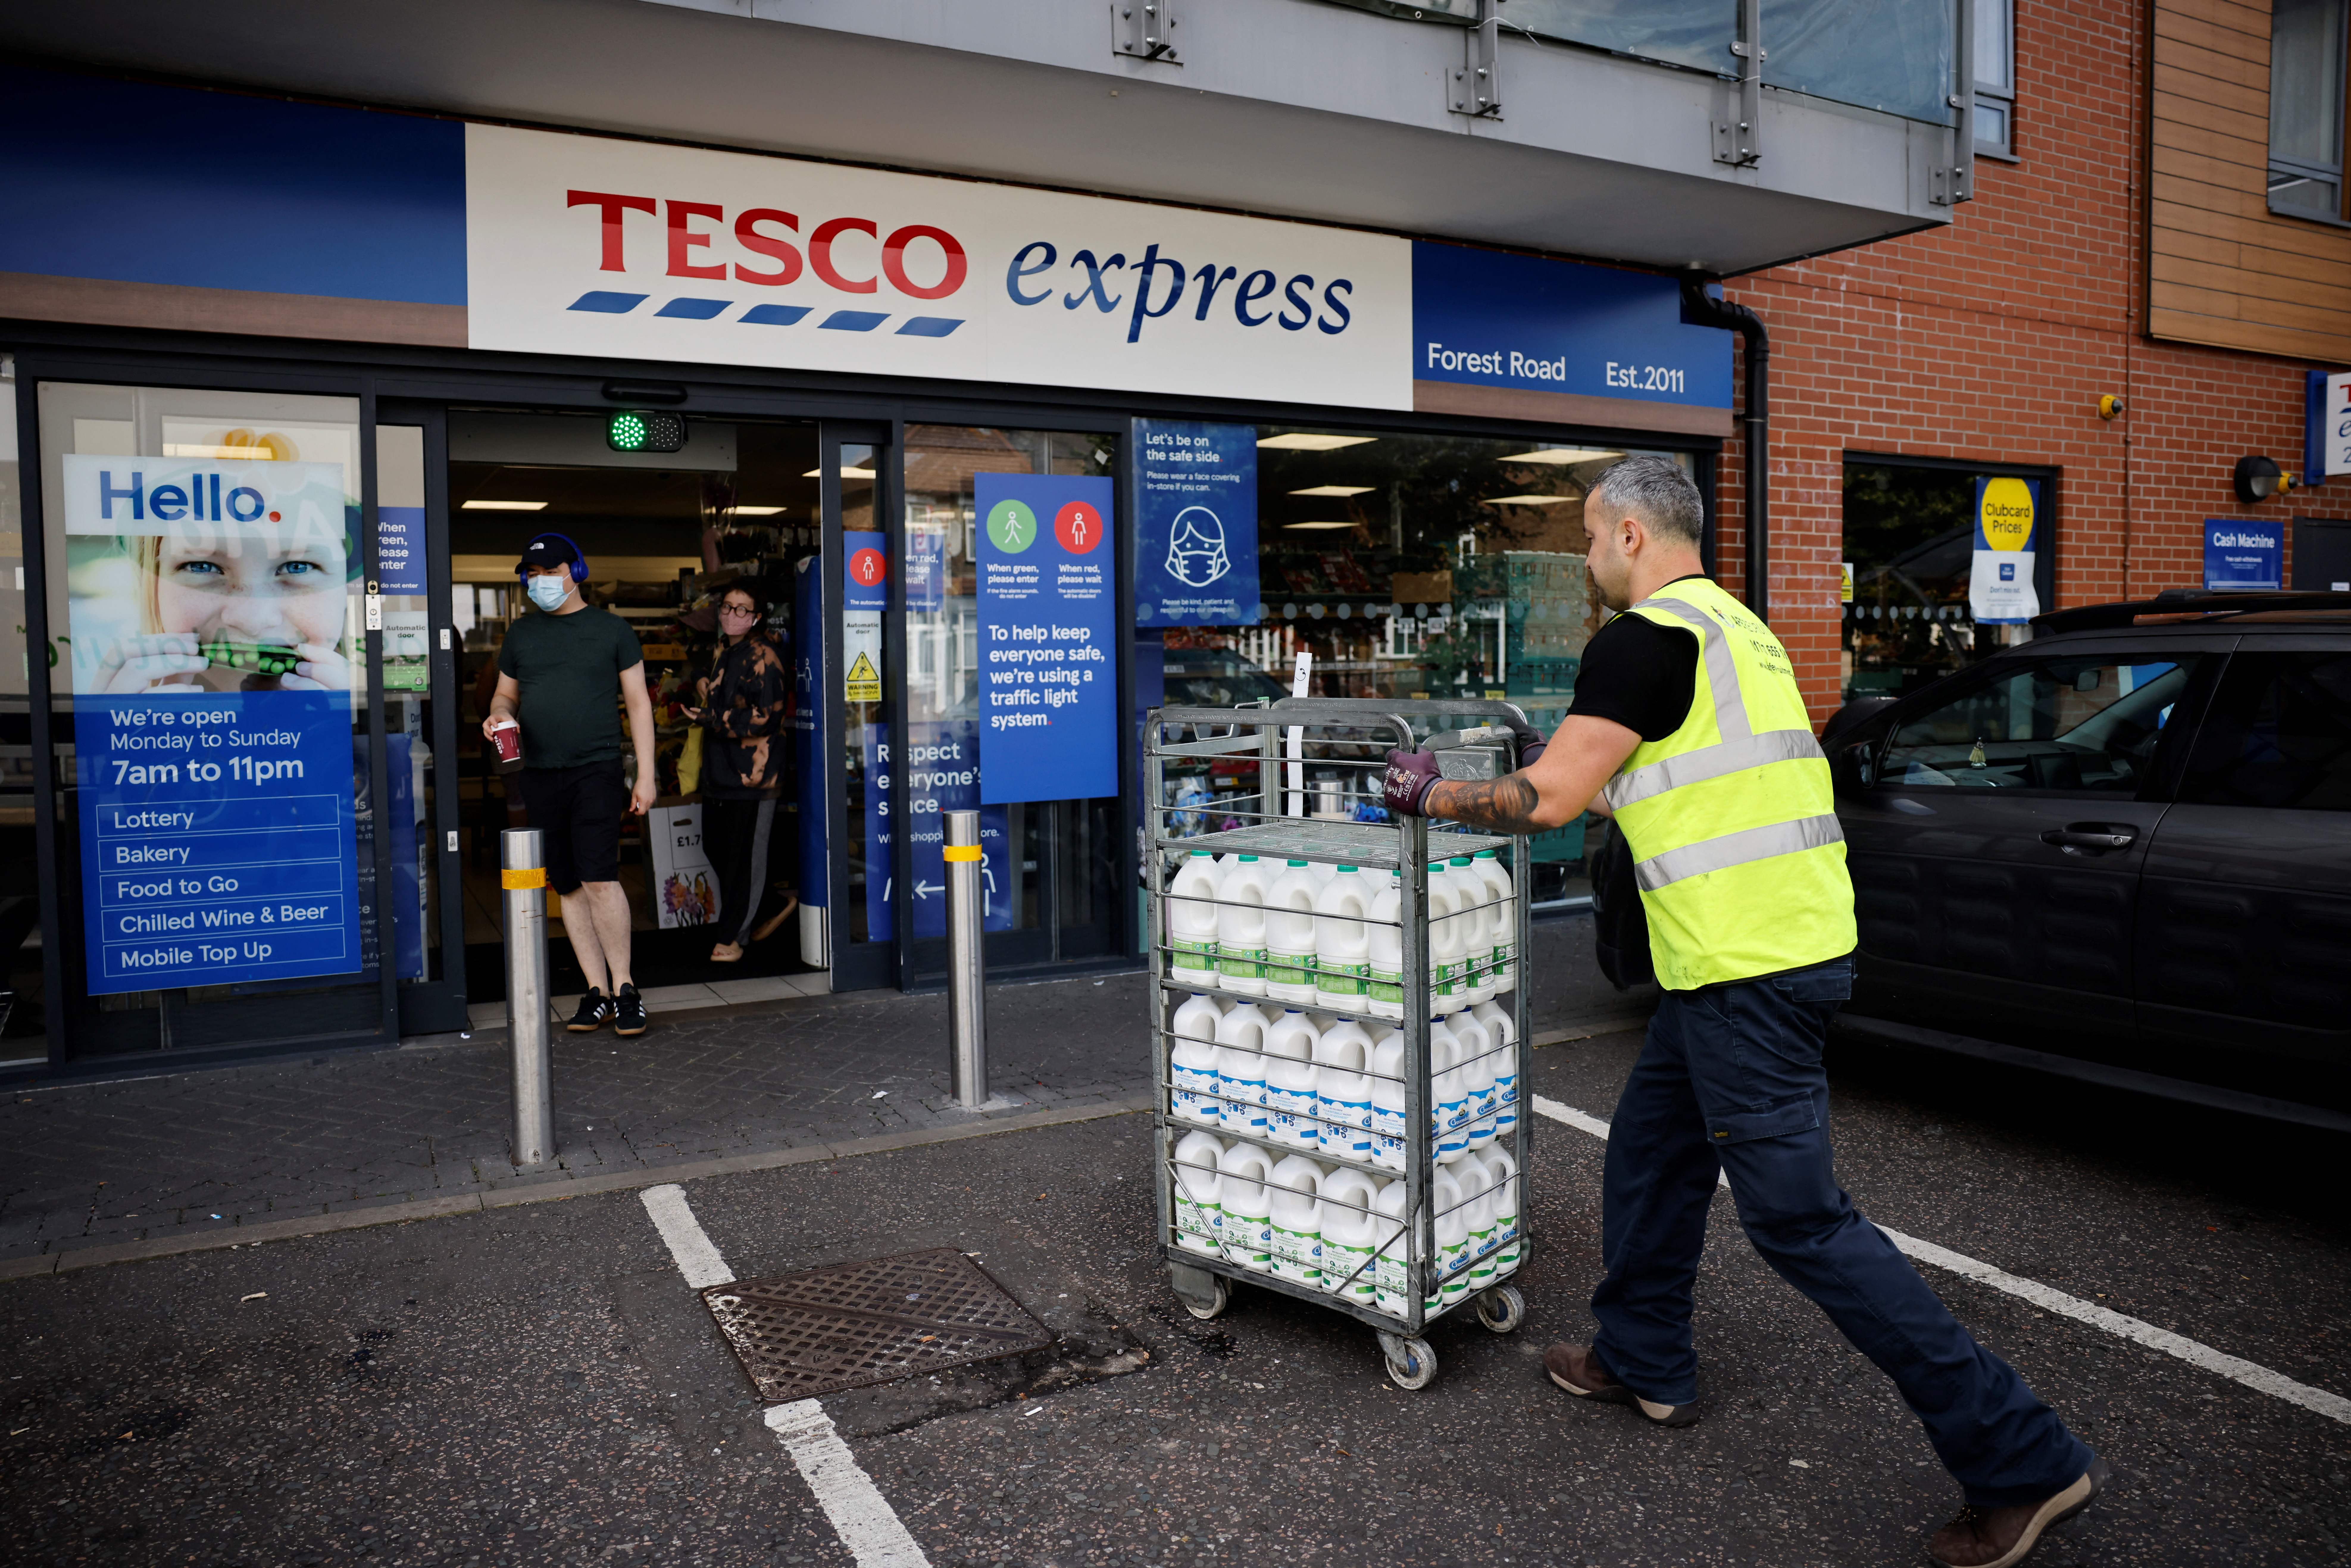 Milk is delivered to a Tesco Express – but not from the farmer down the street